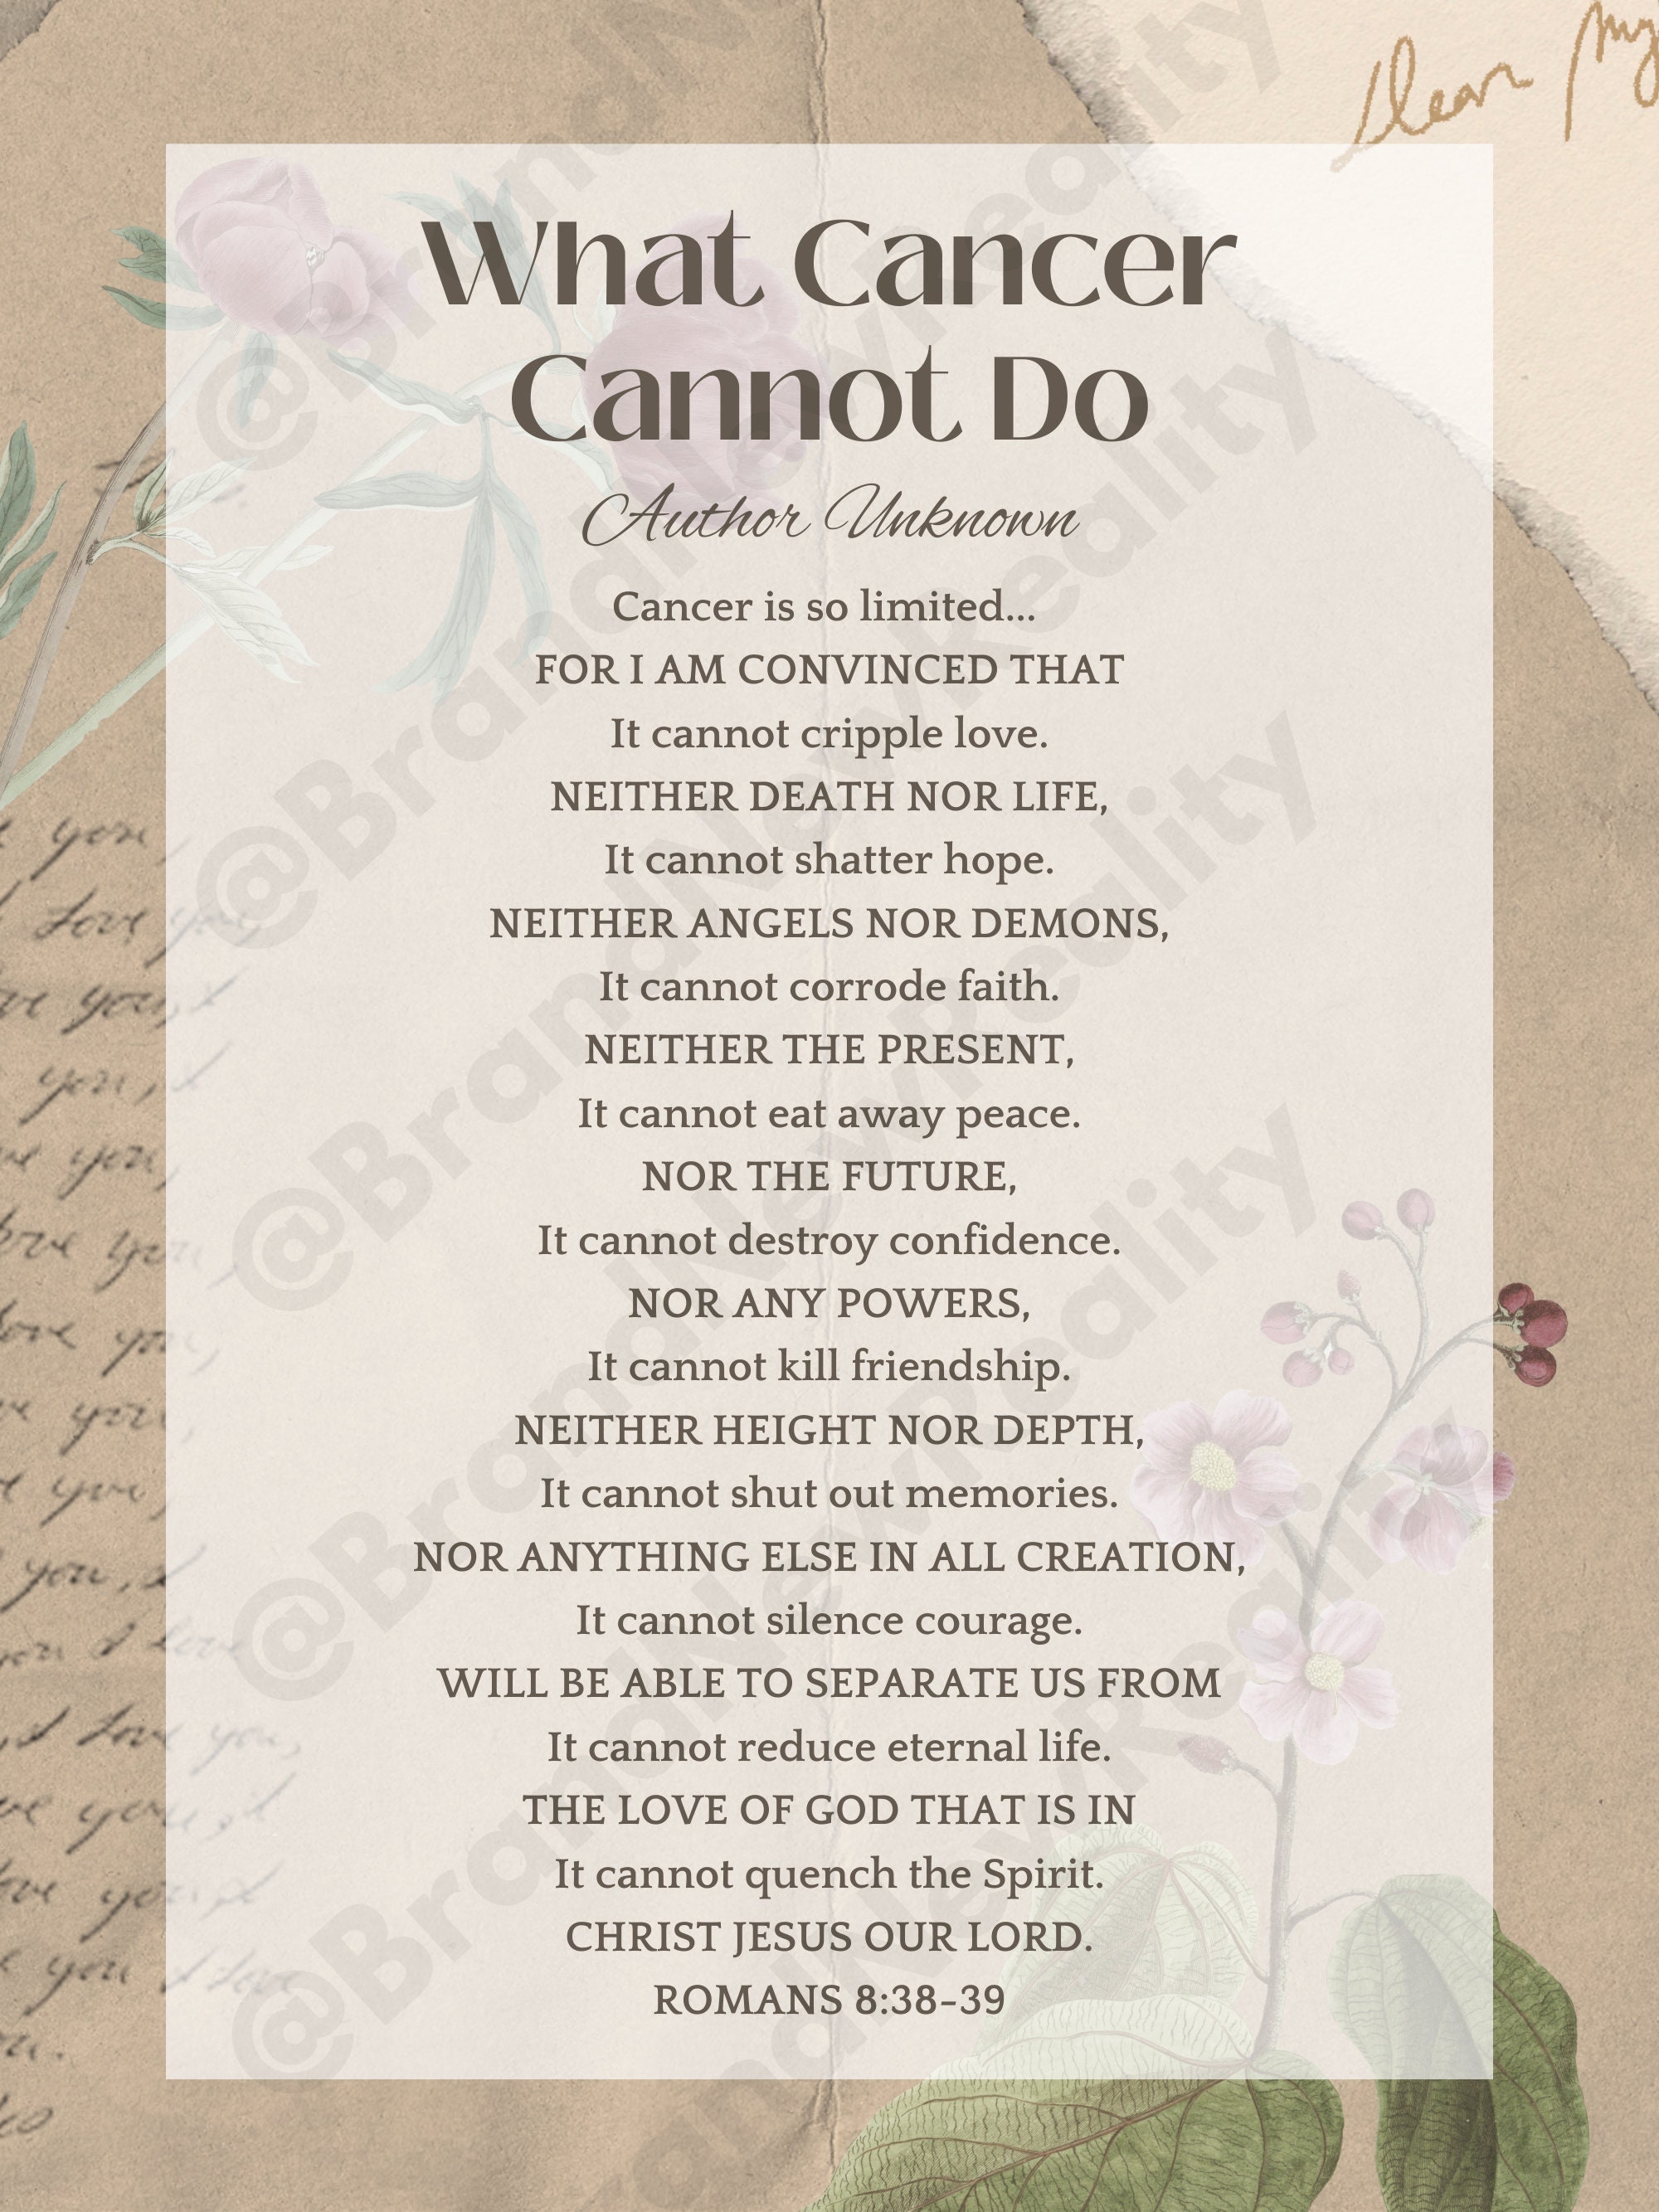 BREAST CANCER AWARENESS WHAT CANCER CANNOT DO PERSONALIZED POEM